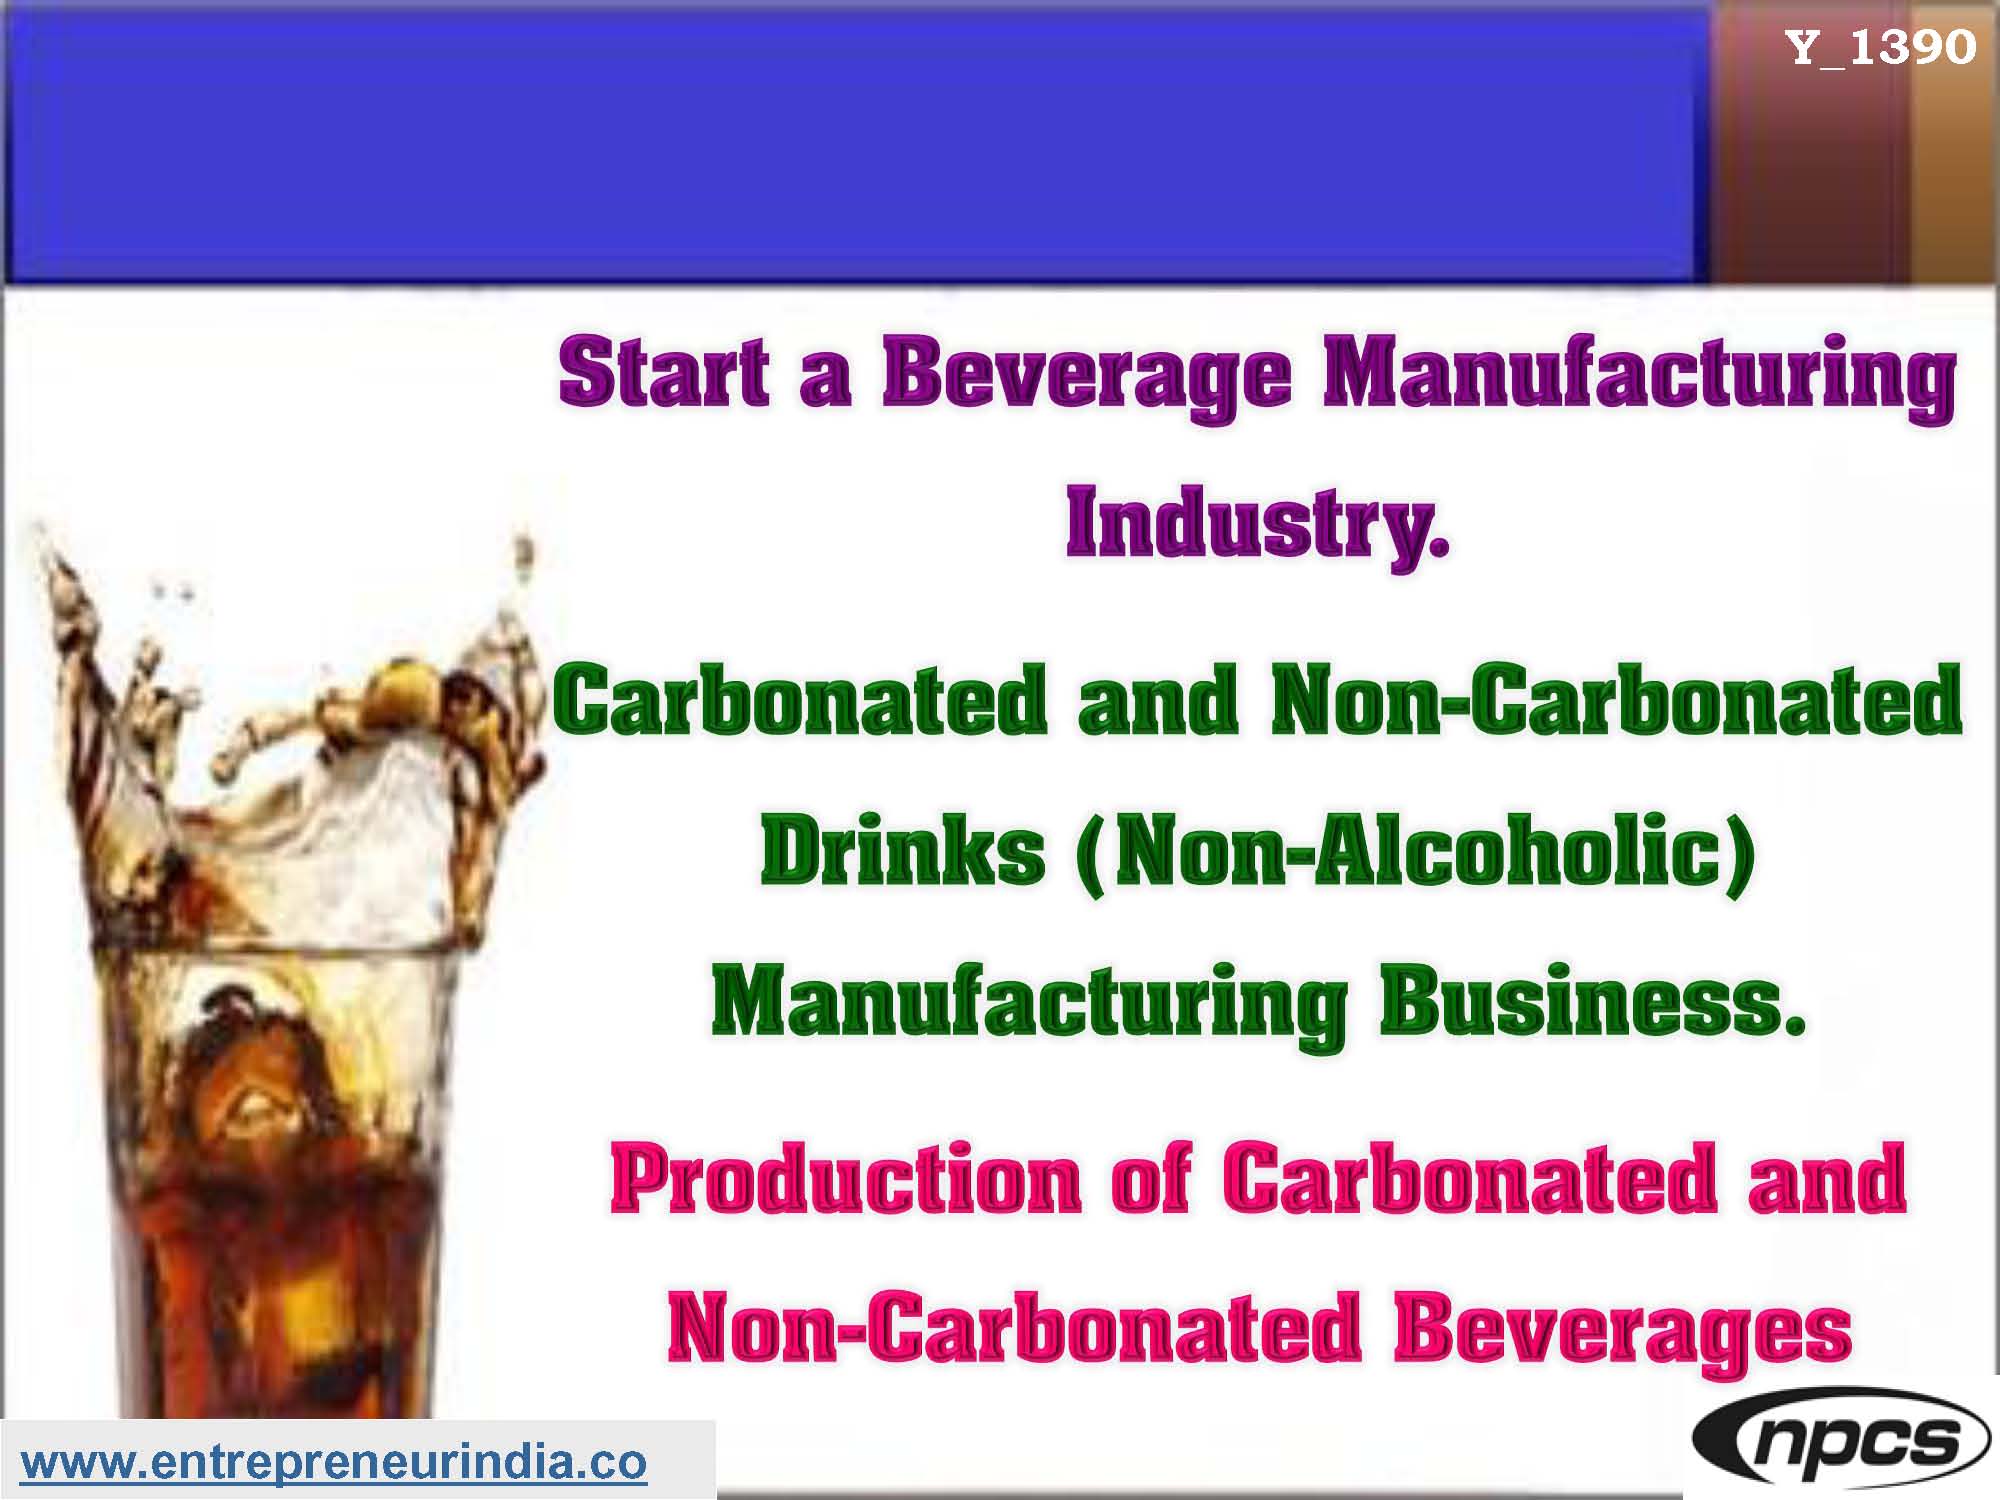 Start a Beverage Manufacturing Industry